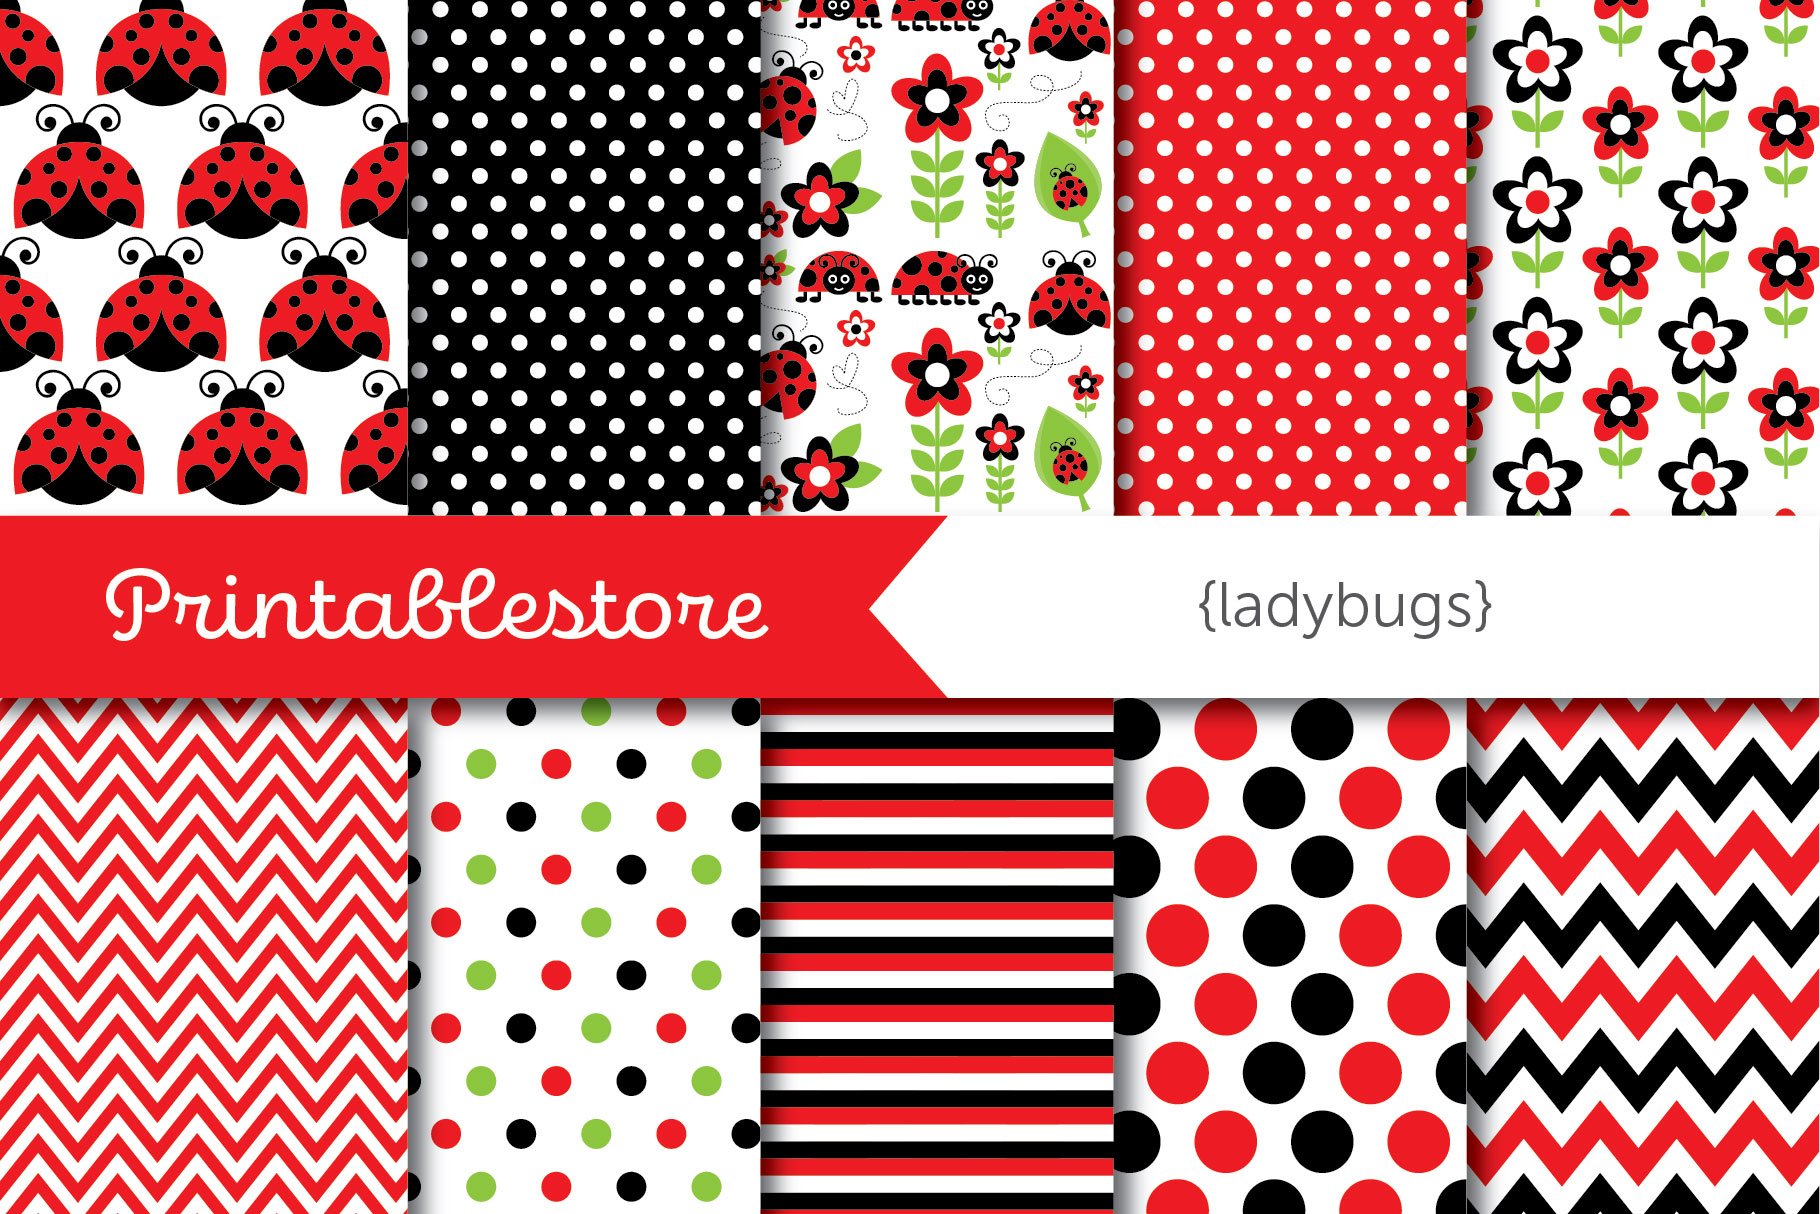 Lady Bugs Paper (DP9) cover image.